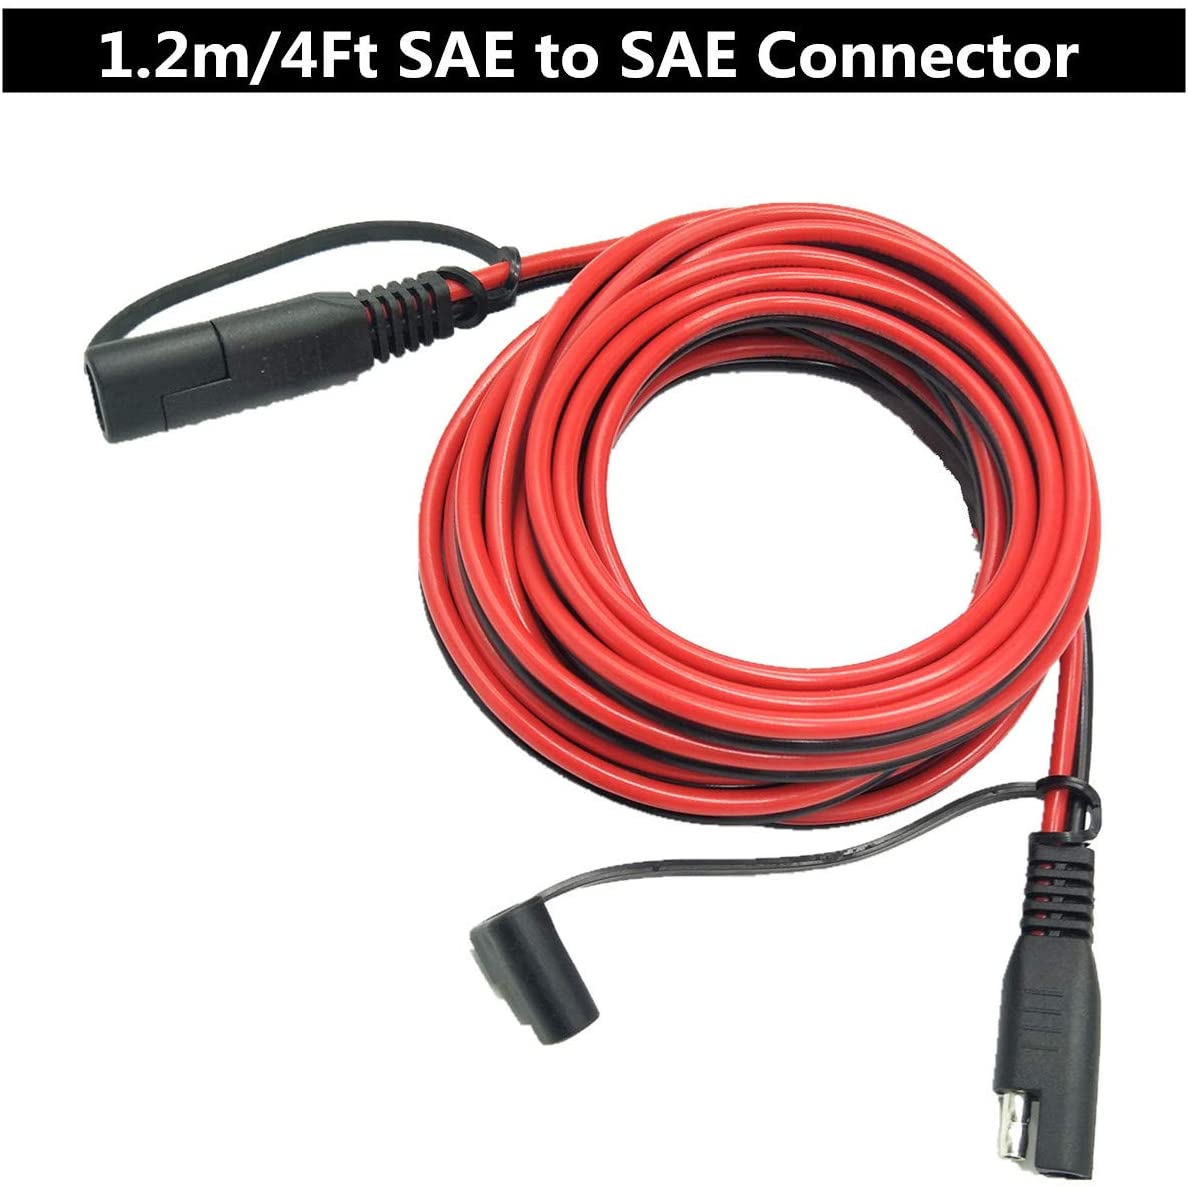 Aimofox Sae to Sae Extension Cable 16 Gauge 2 Pin Wire Harness Heavy Duty DC Cord Quick Disconnect/Connect SAE 1.2m Leads with Dust Cap 